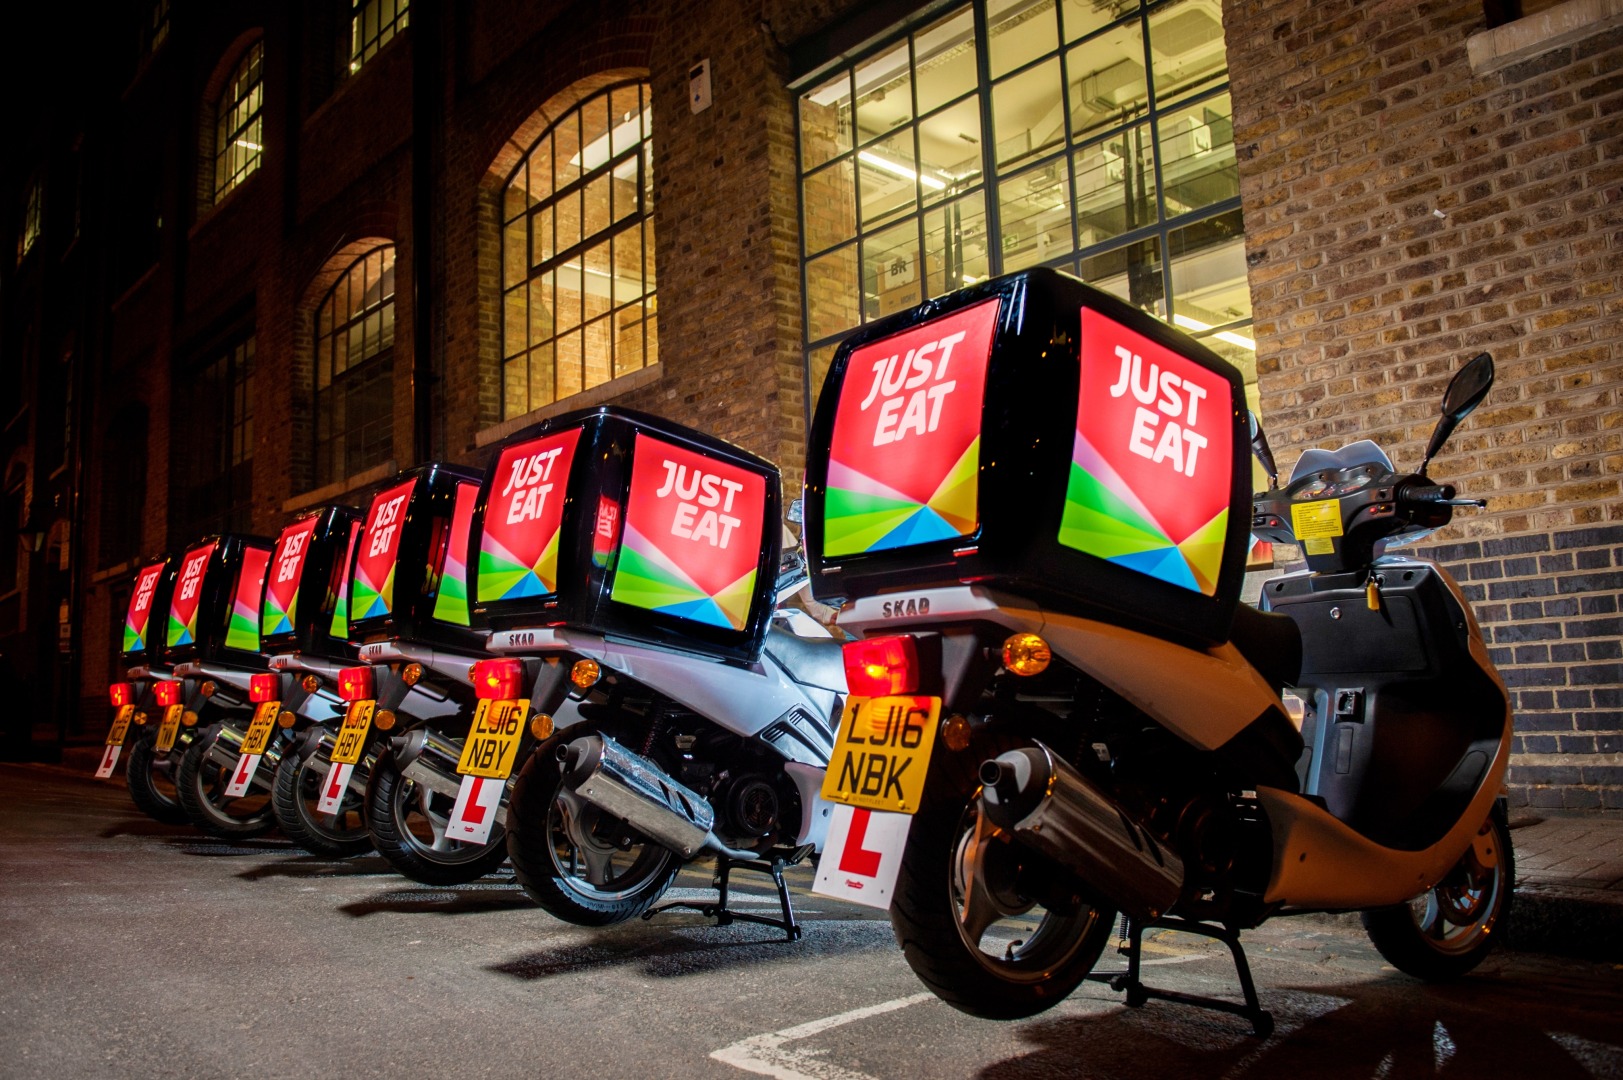 Just Eat to Cut Jobs in the UK as Food Delivery Firms Grapple with Economic Challenges